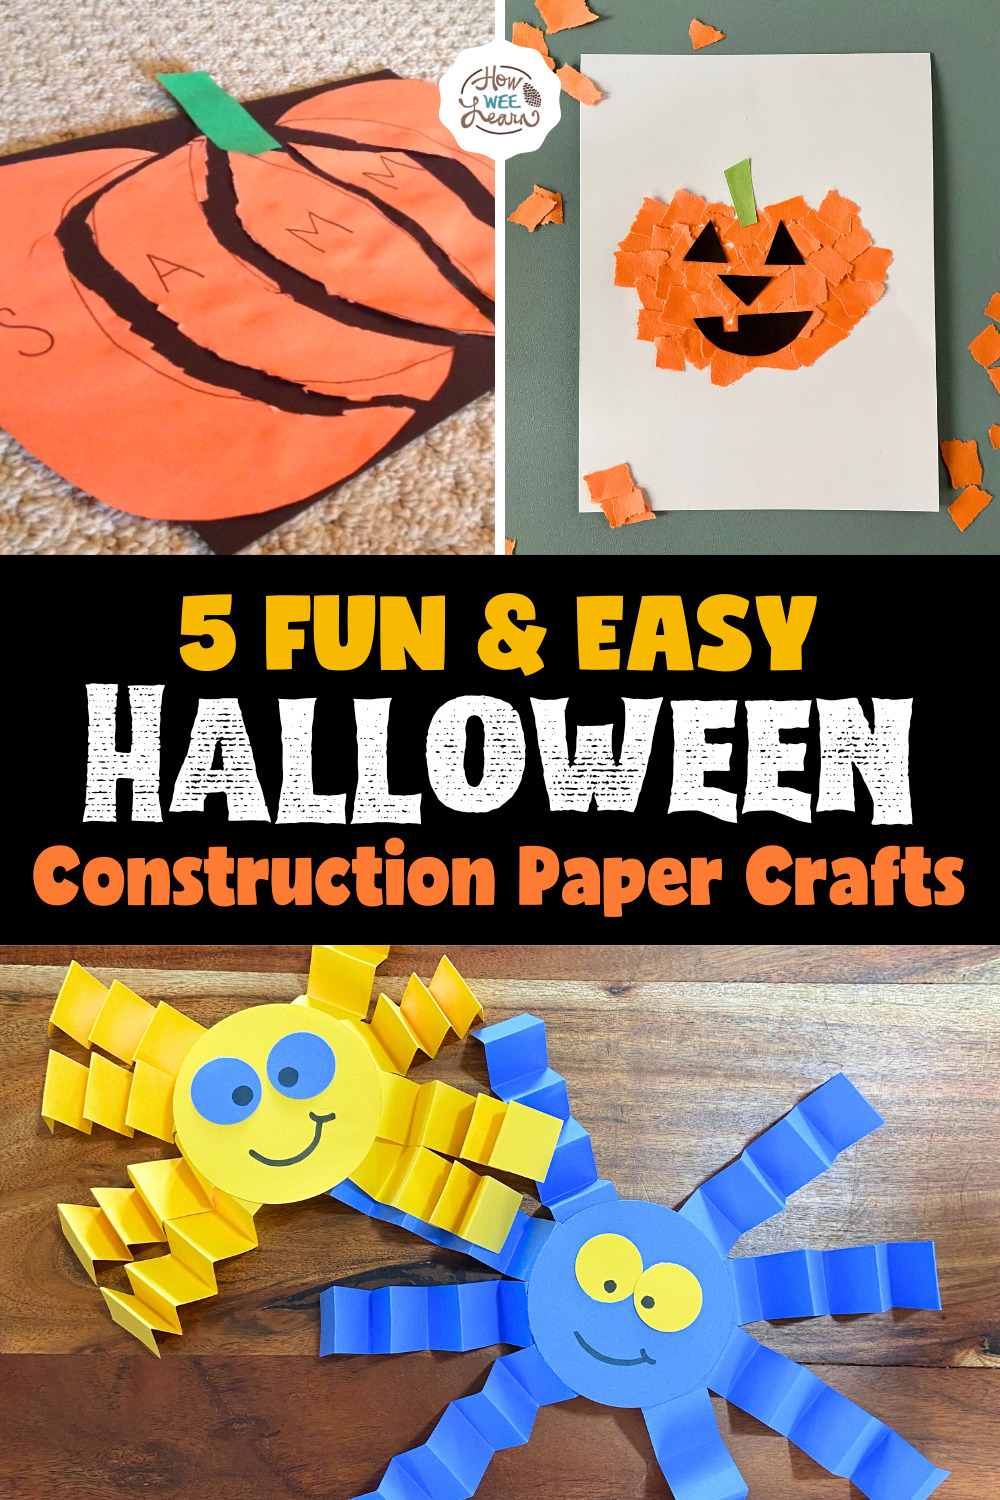  5 Fun & Easy Halloween Construction Paper Crafts